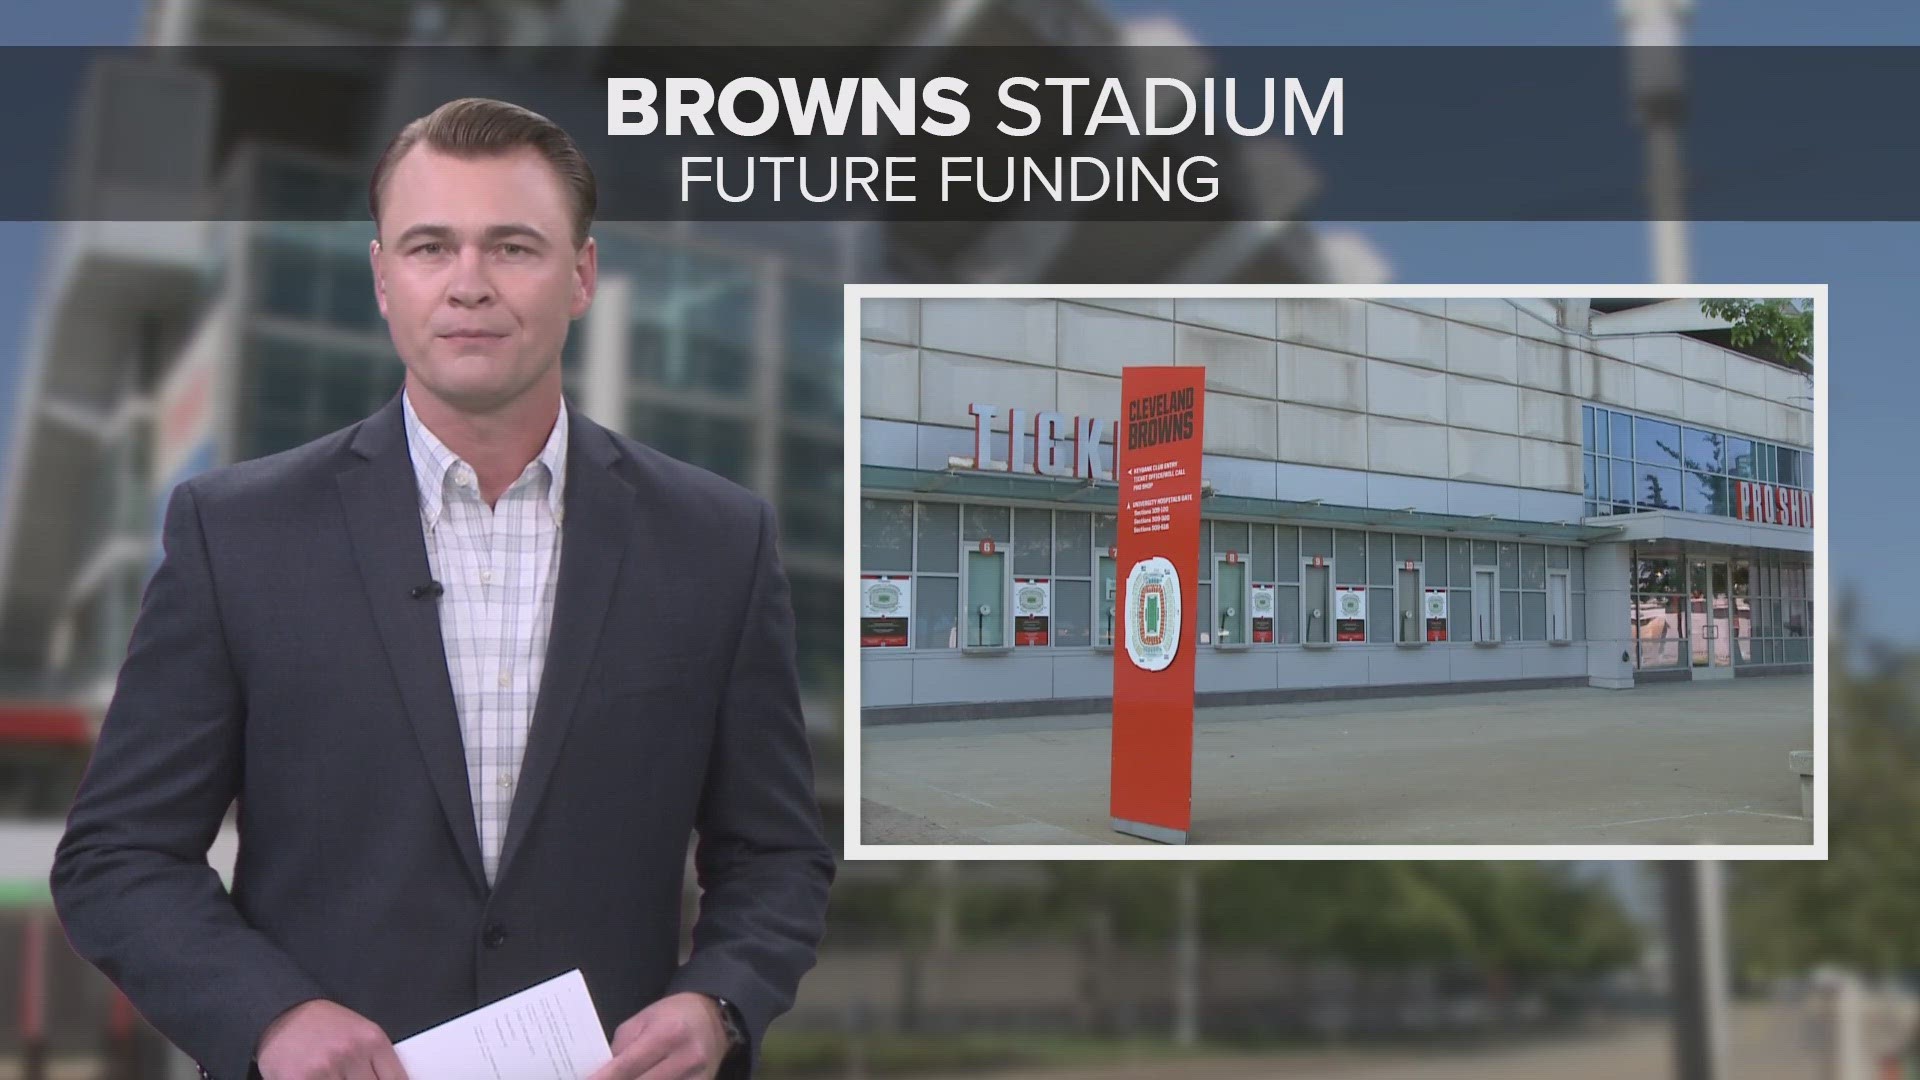 With just over four years left on the the current lease, local leaders are now up against the clock to secure funding for a new or renovated stadium.